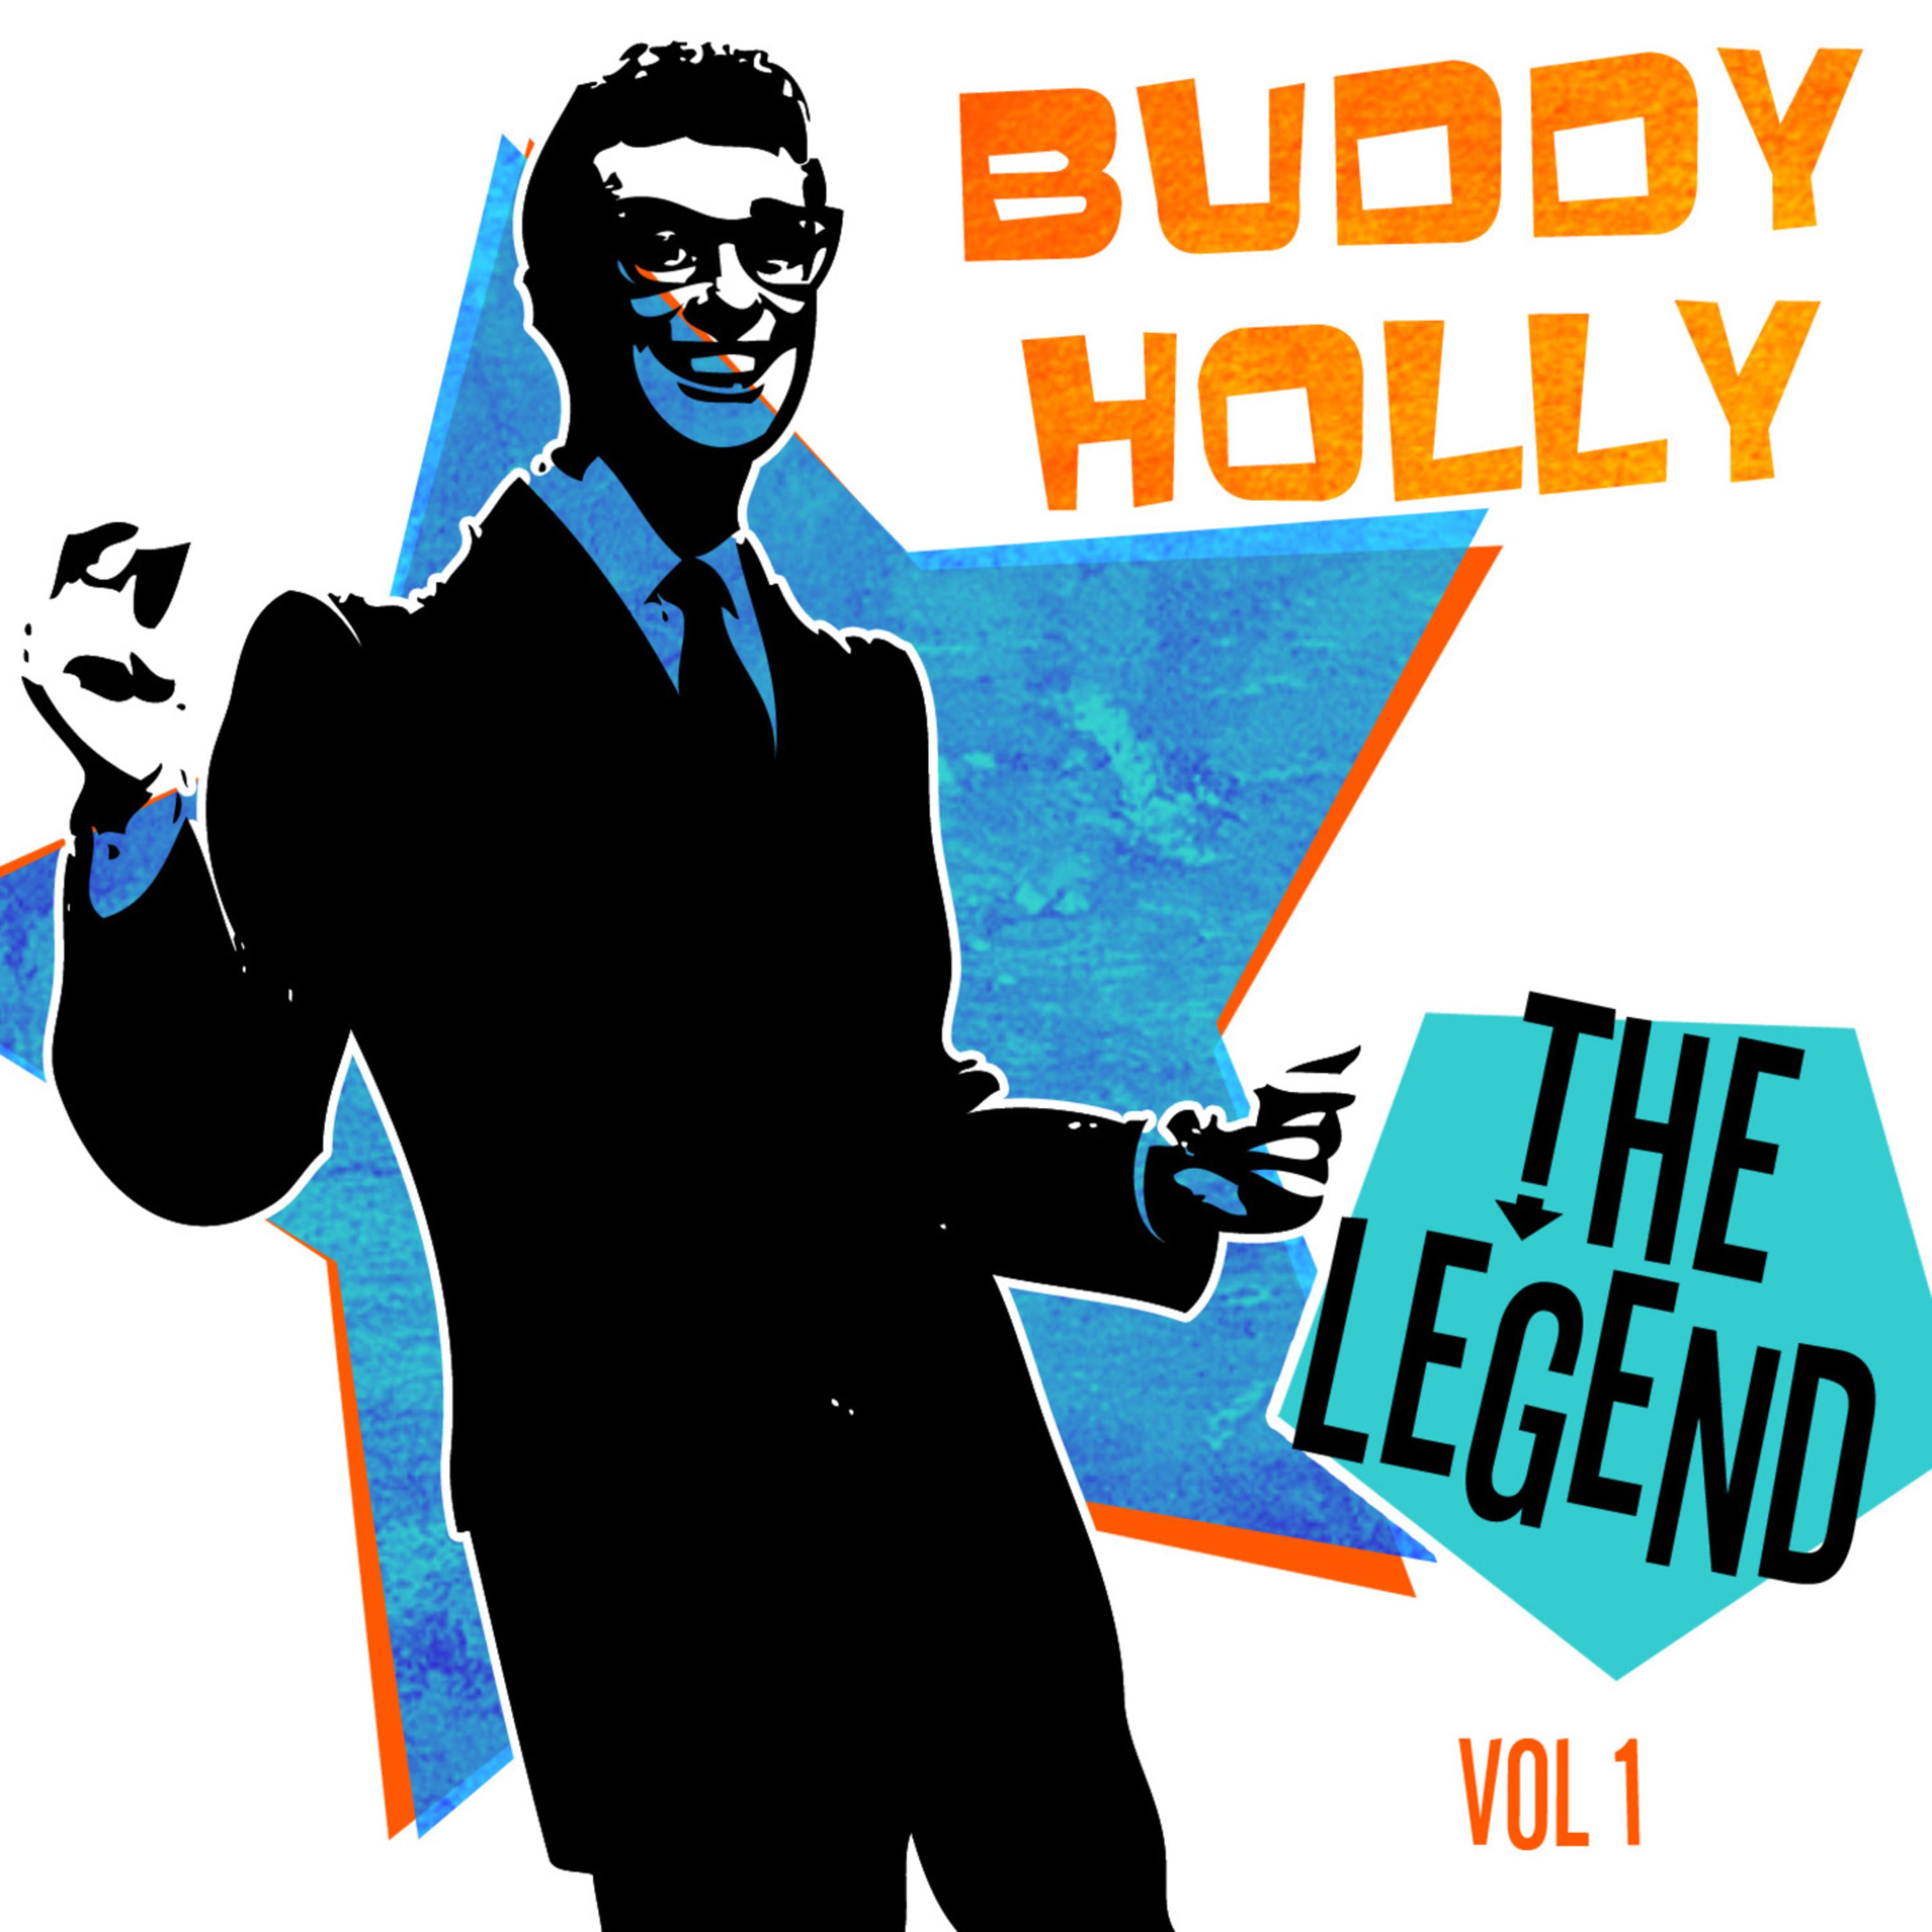 Buddy Holly - The Legend - Volume 1